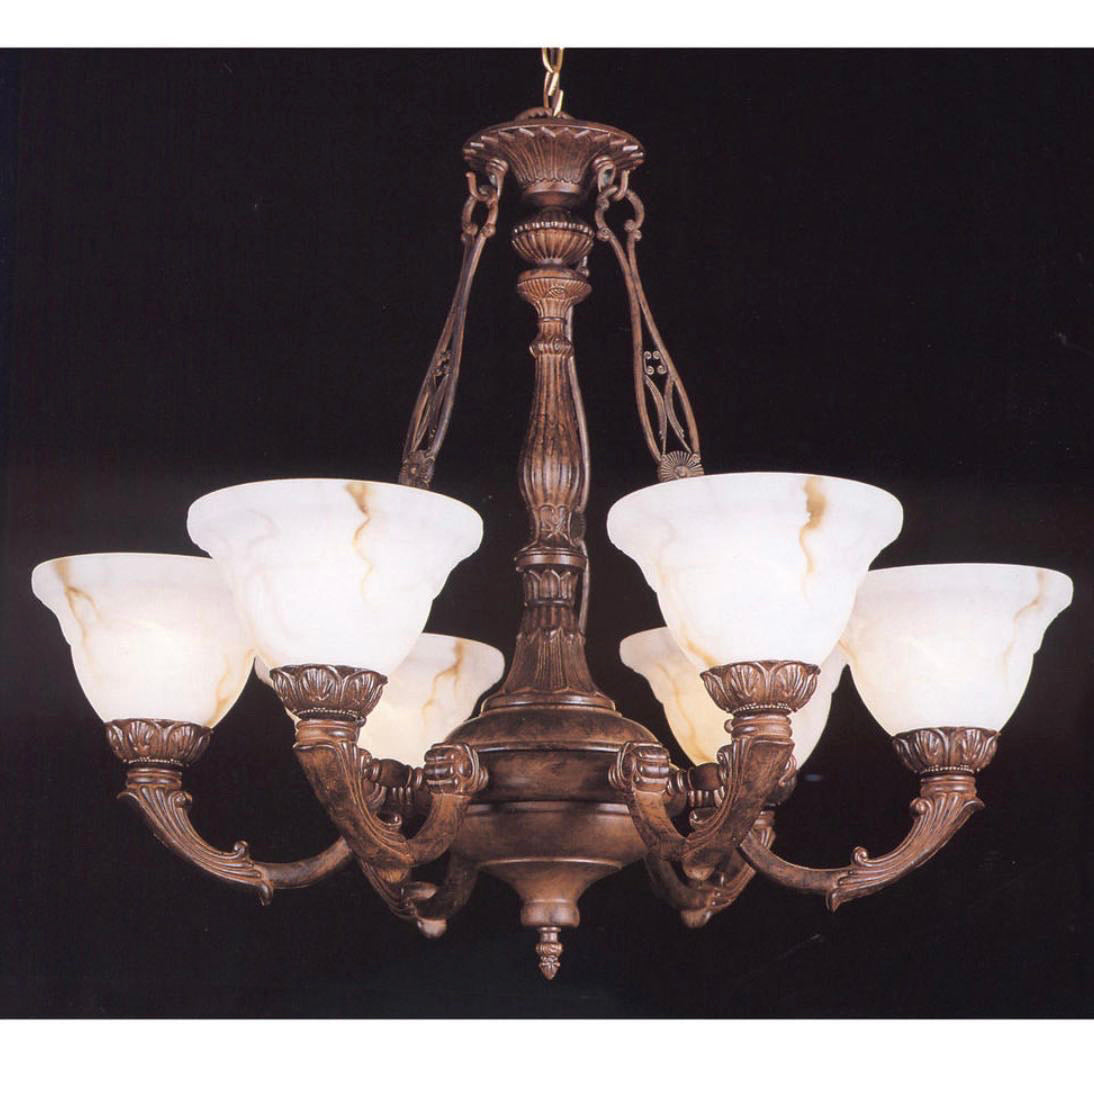 Elk Home 6-Light Bronze Ornate with Yellow and White Marbled Glass Shades Chandelier